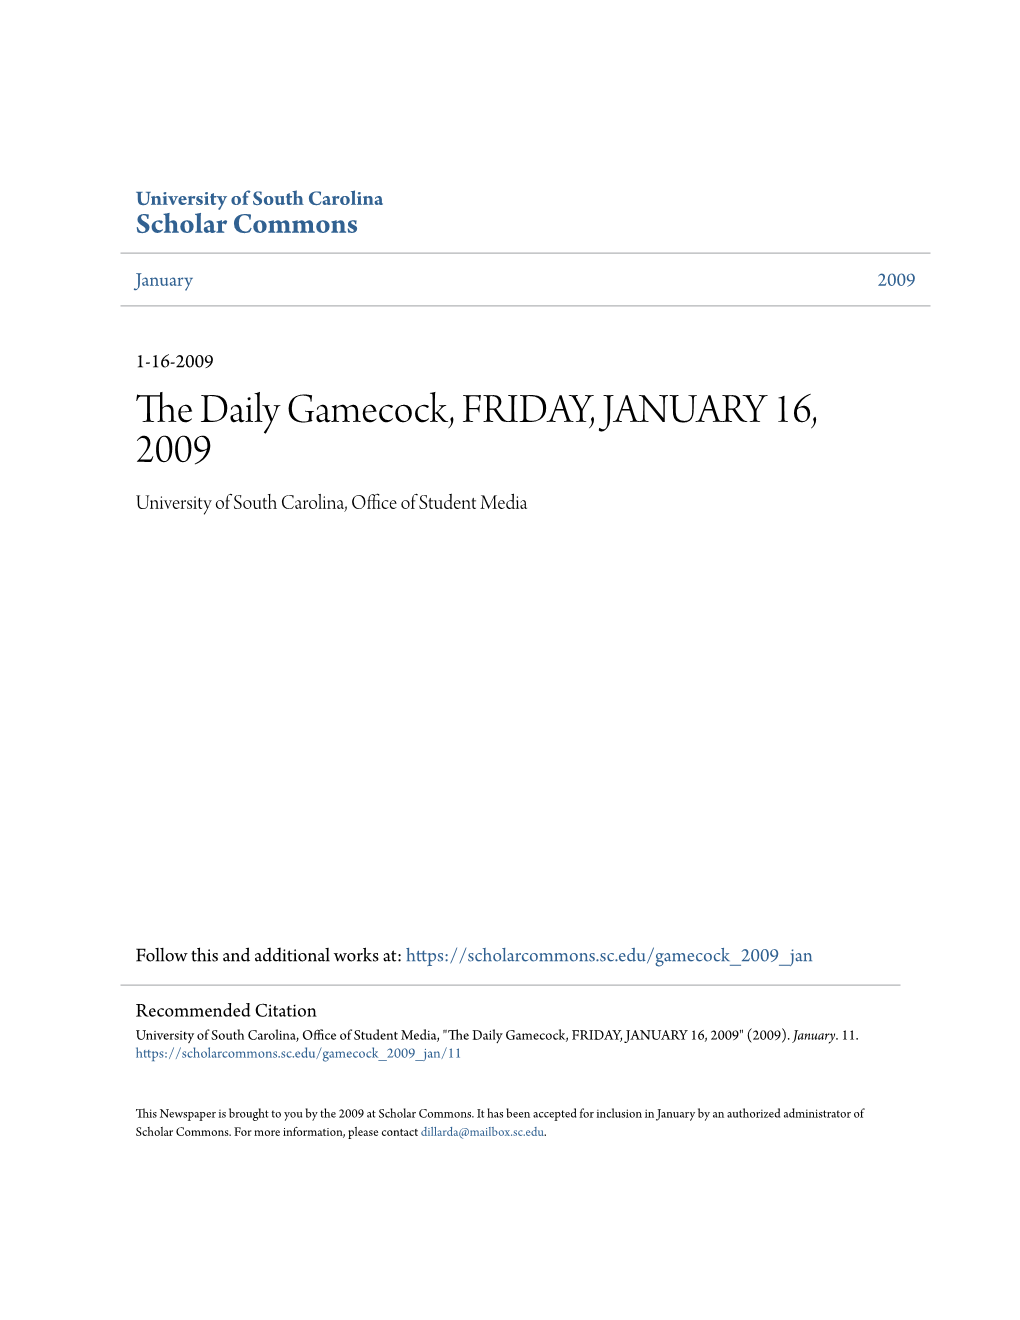 The Daily Gamecock, FRIDAY, JANUARY 16, 2009